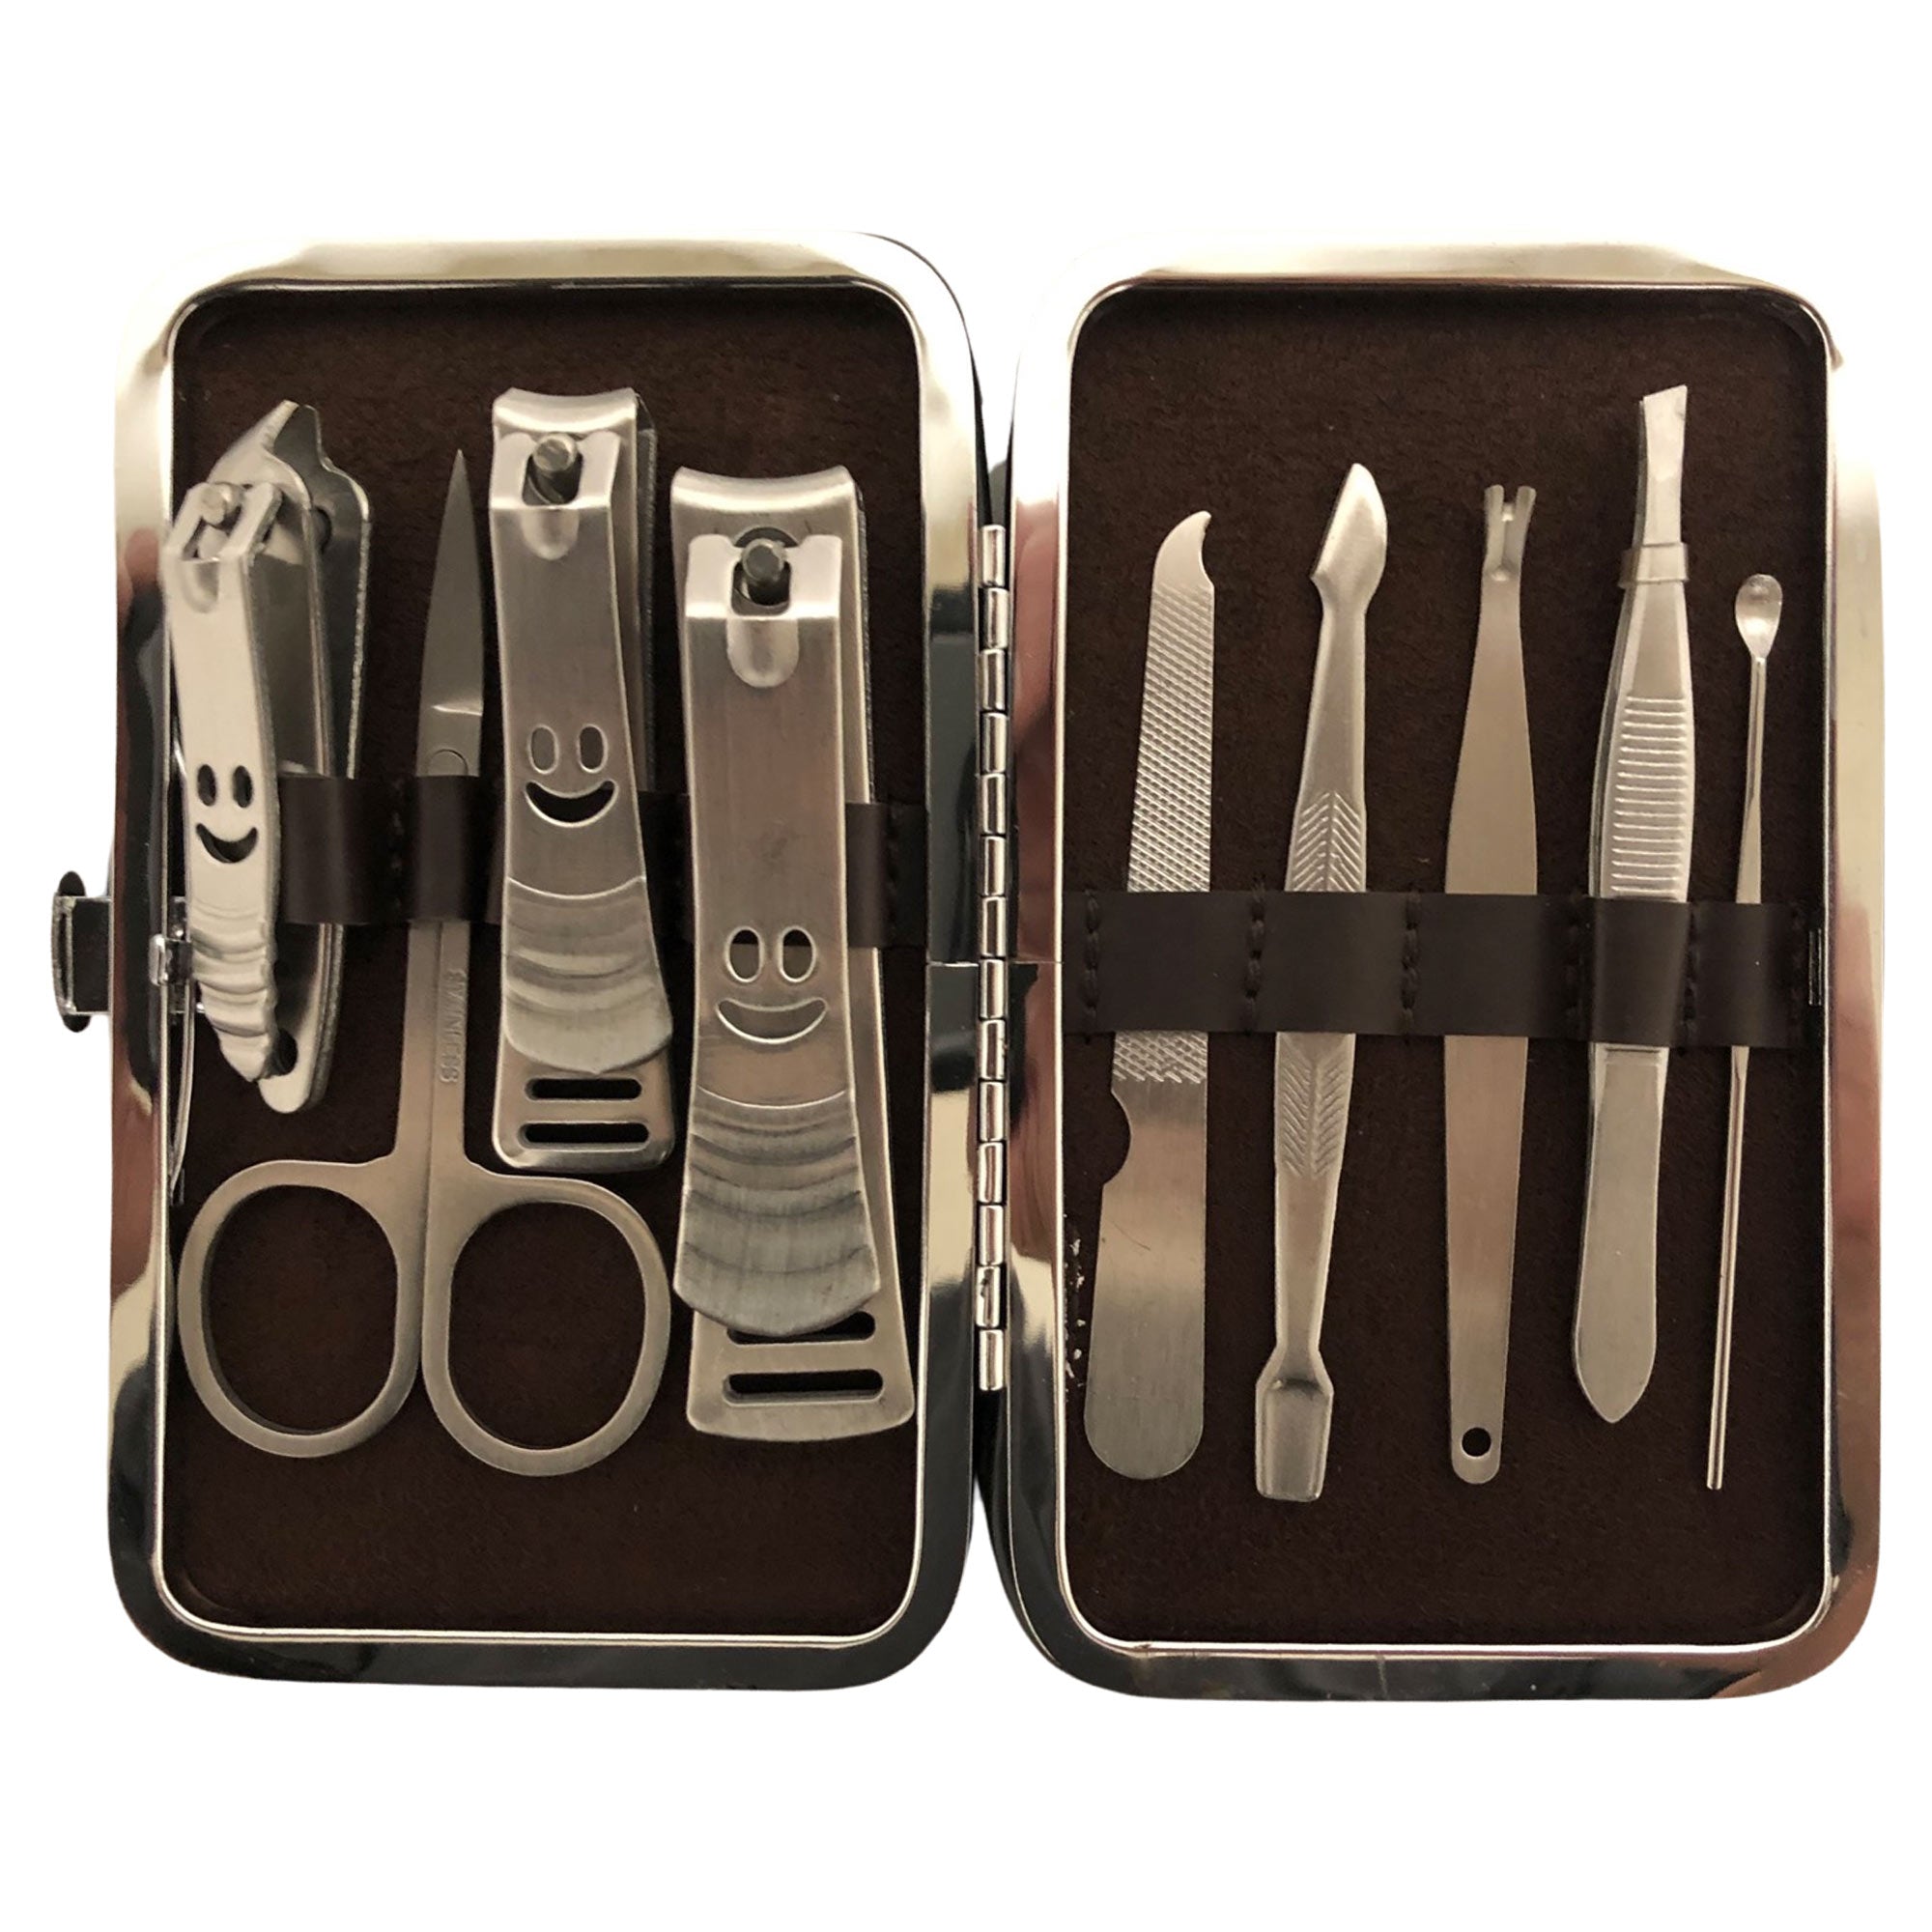 CLEARANCE SNAKE  PRINT MANICURE SET (CASE OF 24 - $2.50 / PIECE)  Wholesale 9 Piece Stainless Steel Manicure Set in Silver White Snake SKU: 9699-SNK-SILVER-24